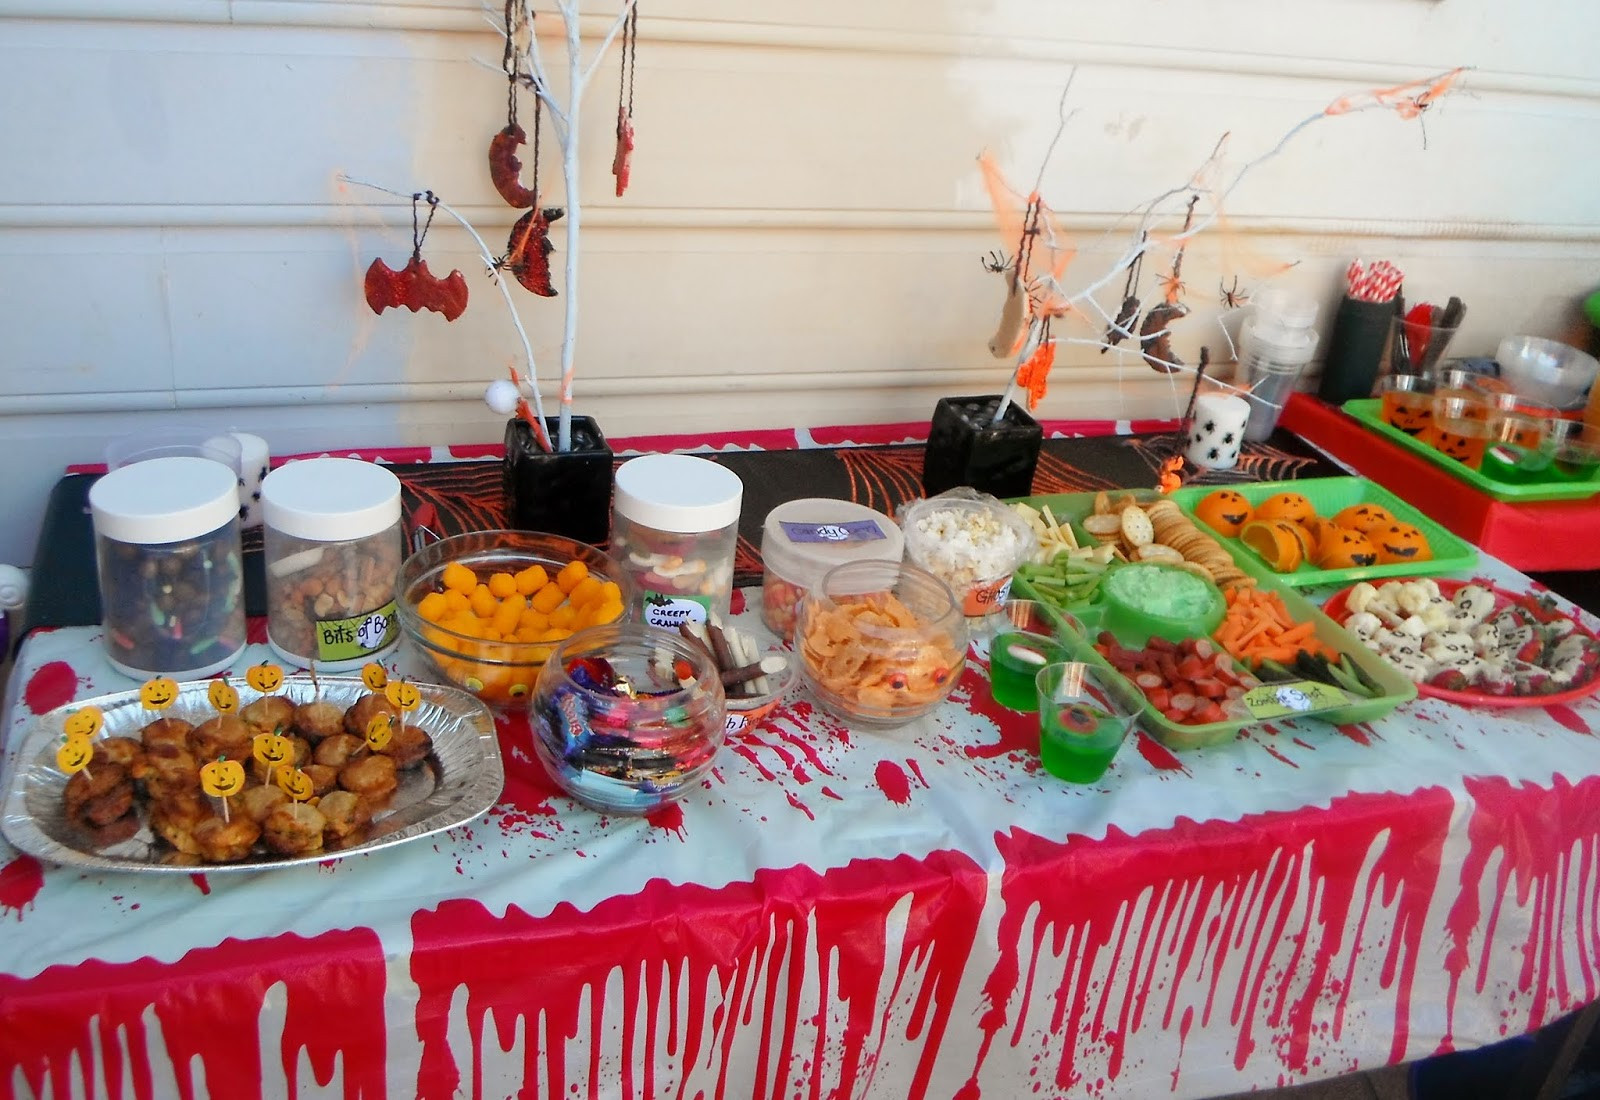 Backyard Kids Halloween Party Ideas
 Adventures at home with Mum Halloween Party Food